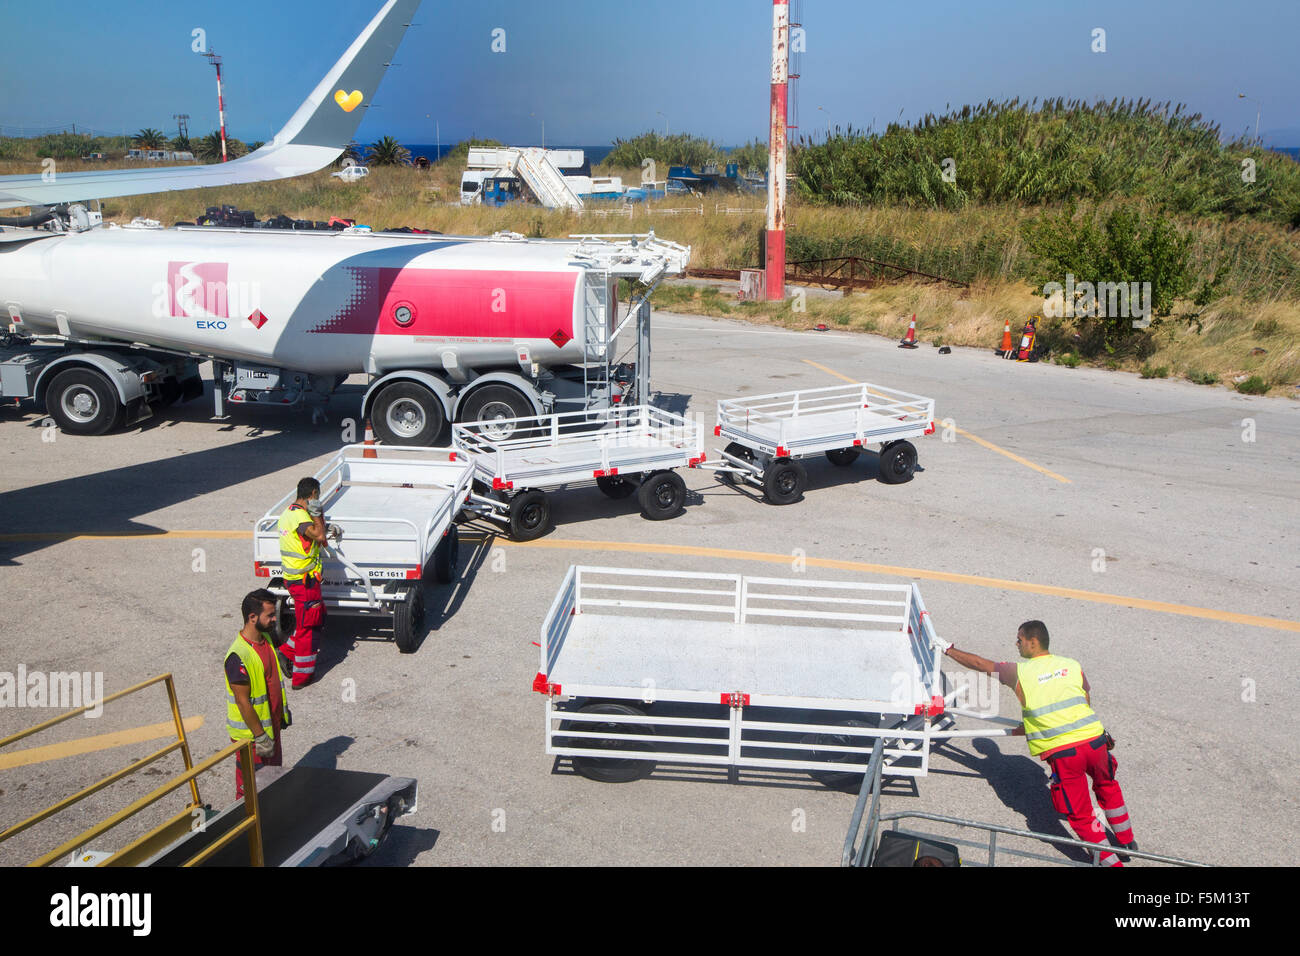 Baggage handlers and a refuelling tanker at Mytilene airport on Lesvos, Greece. Stock Photo